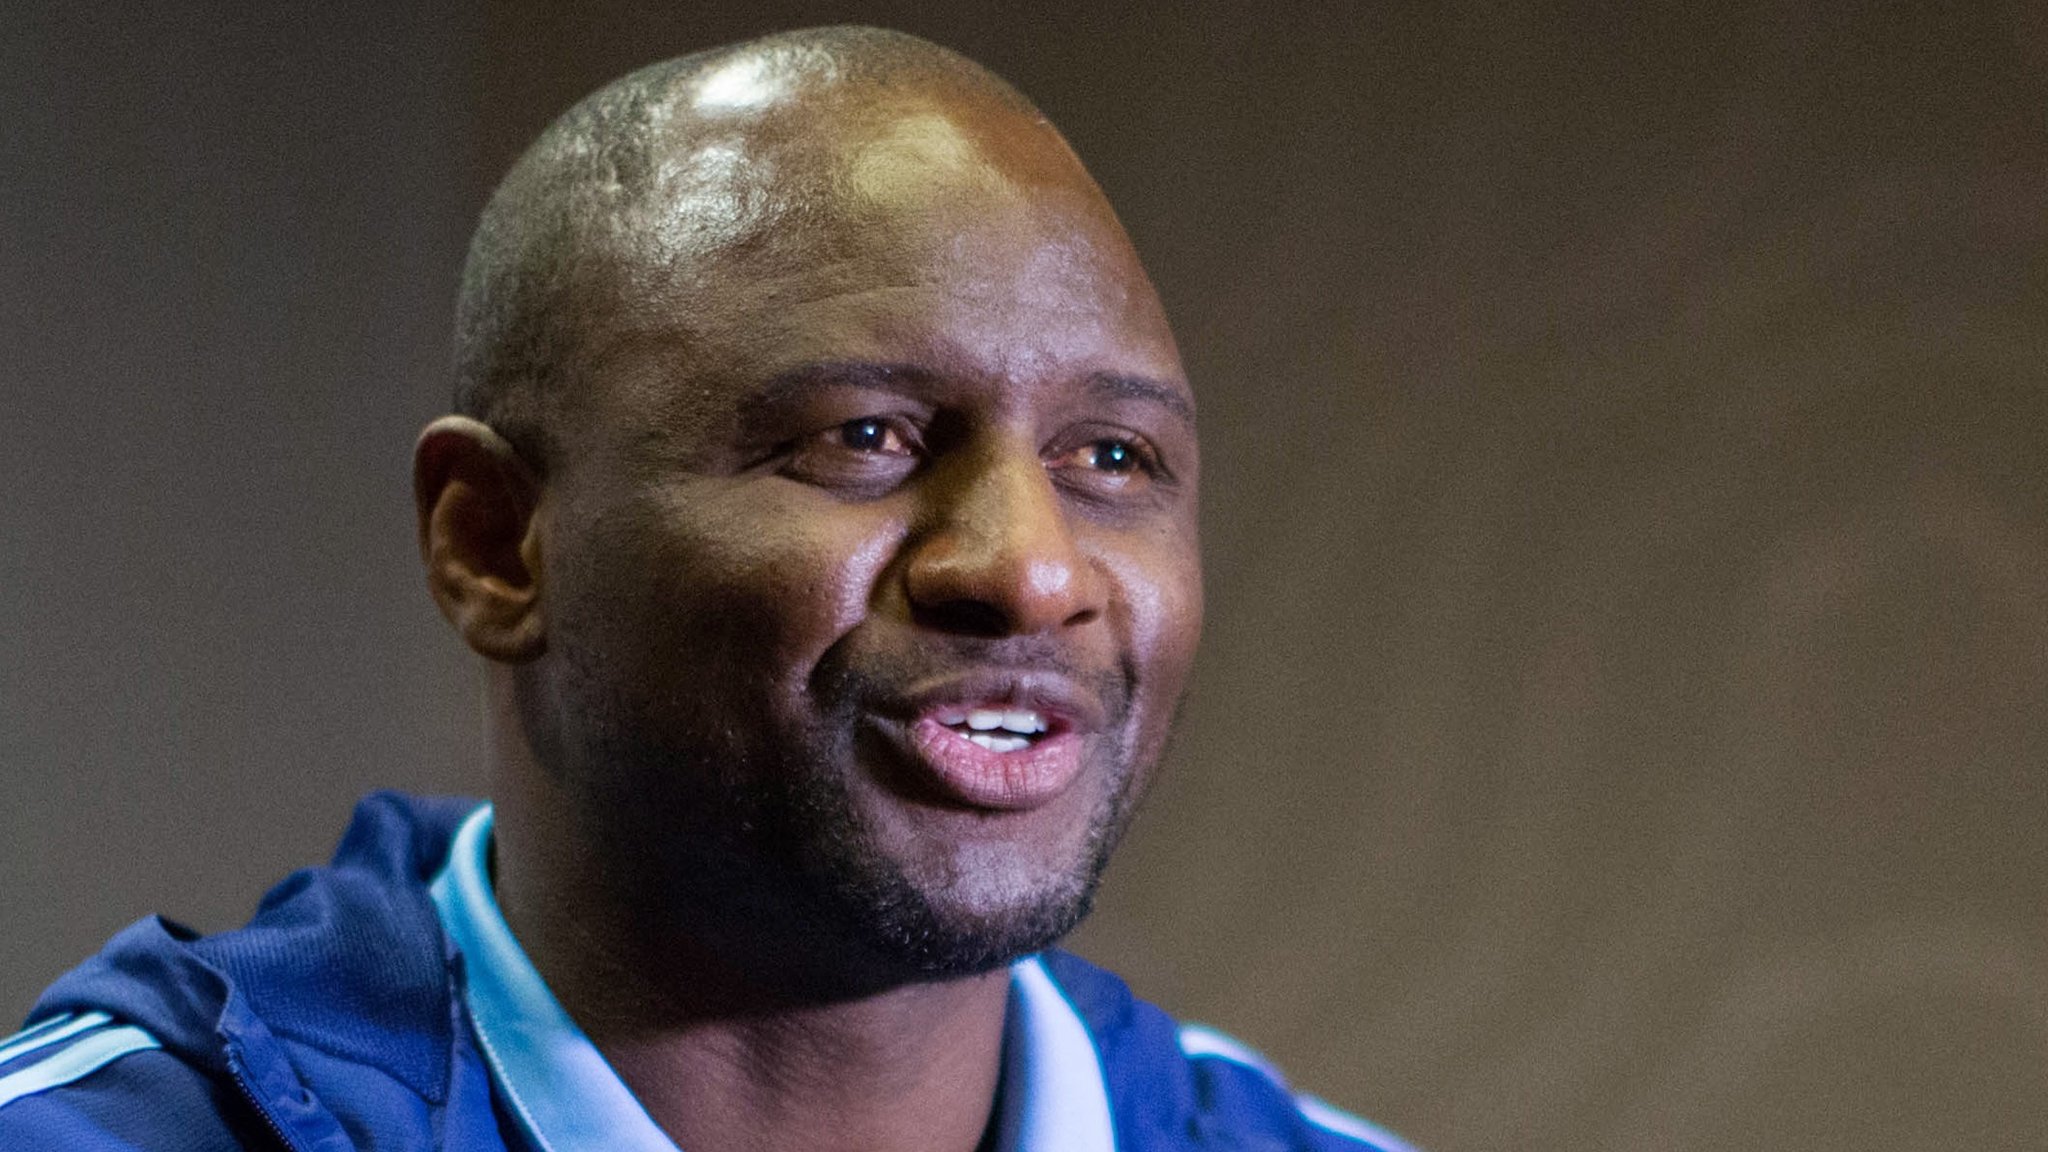 Vieira 'flattered' by Arsenal link but 'happy' at New York City